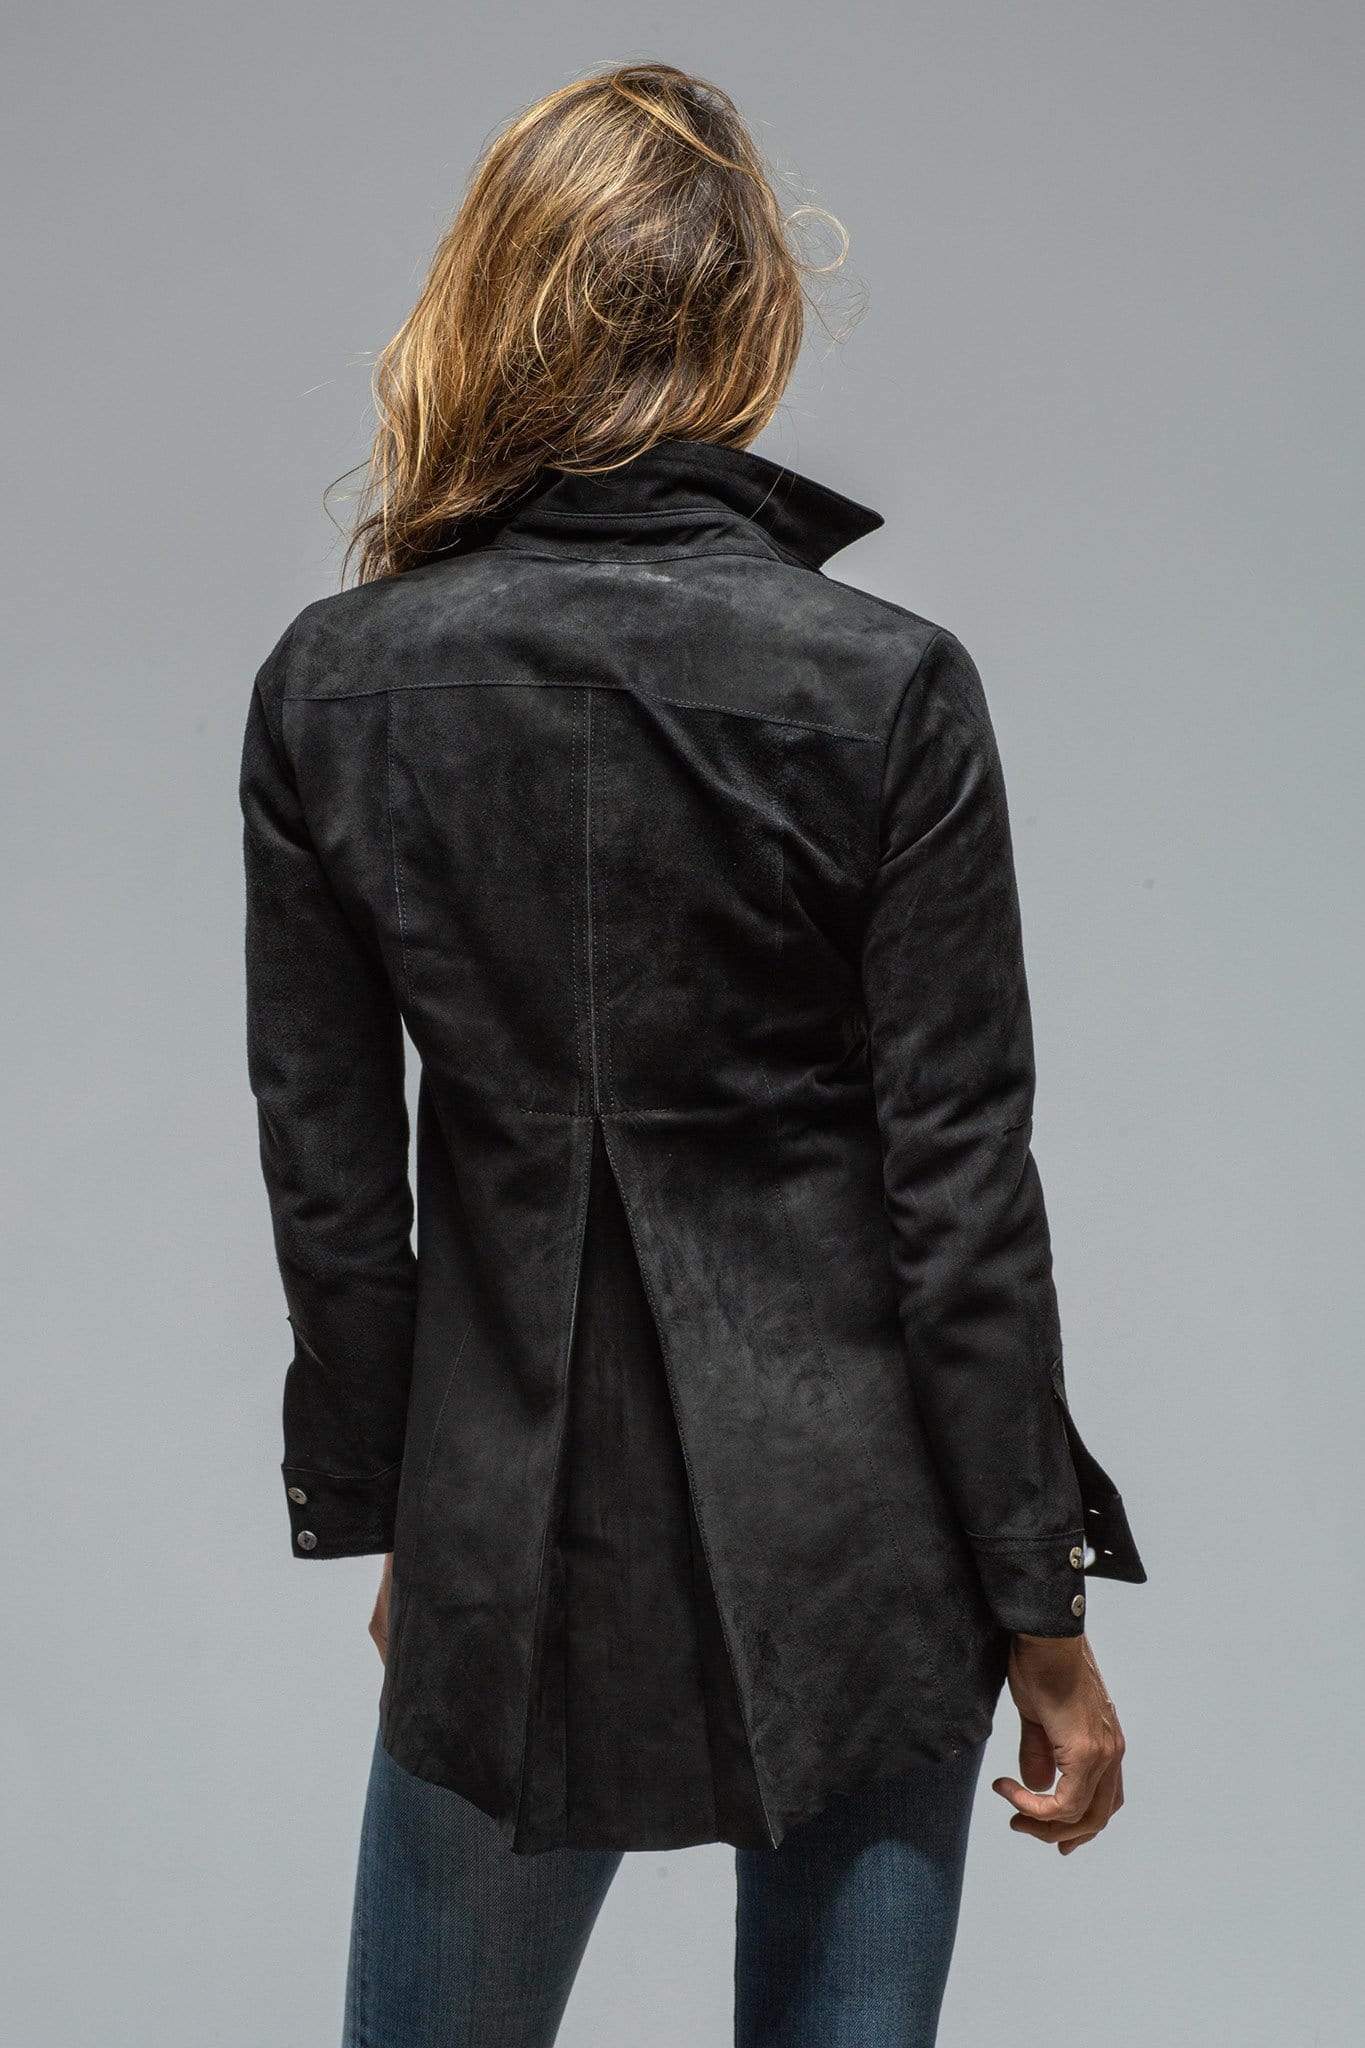 Olivia Long Suede Shirt w/ Pleated Back in Black - AXEL'S